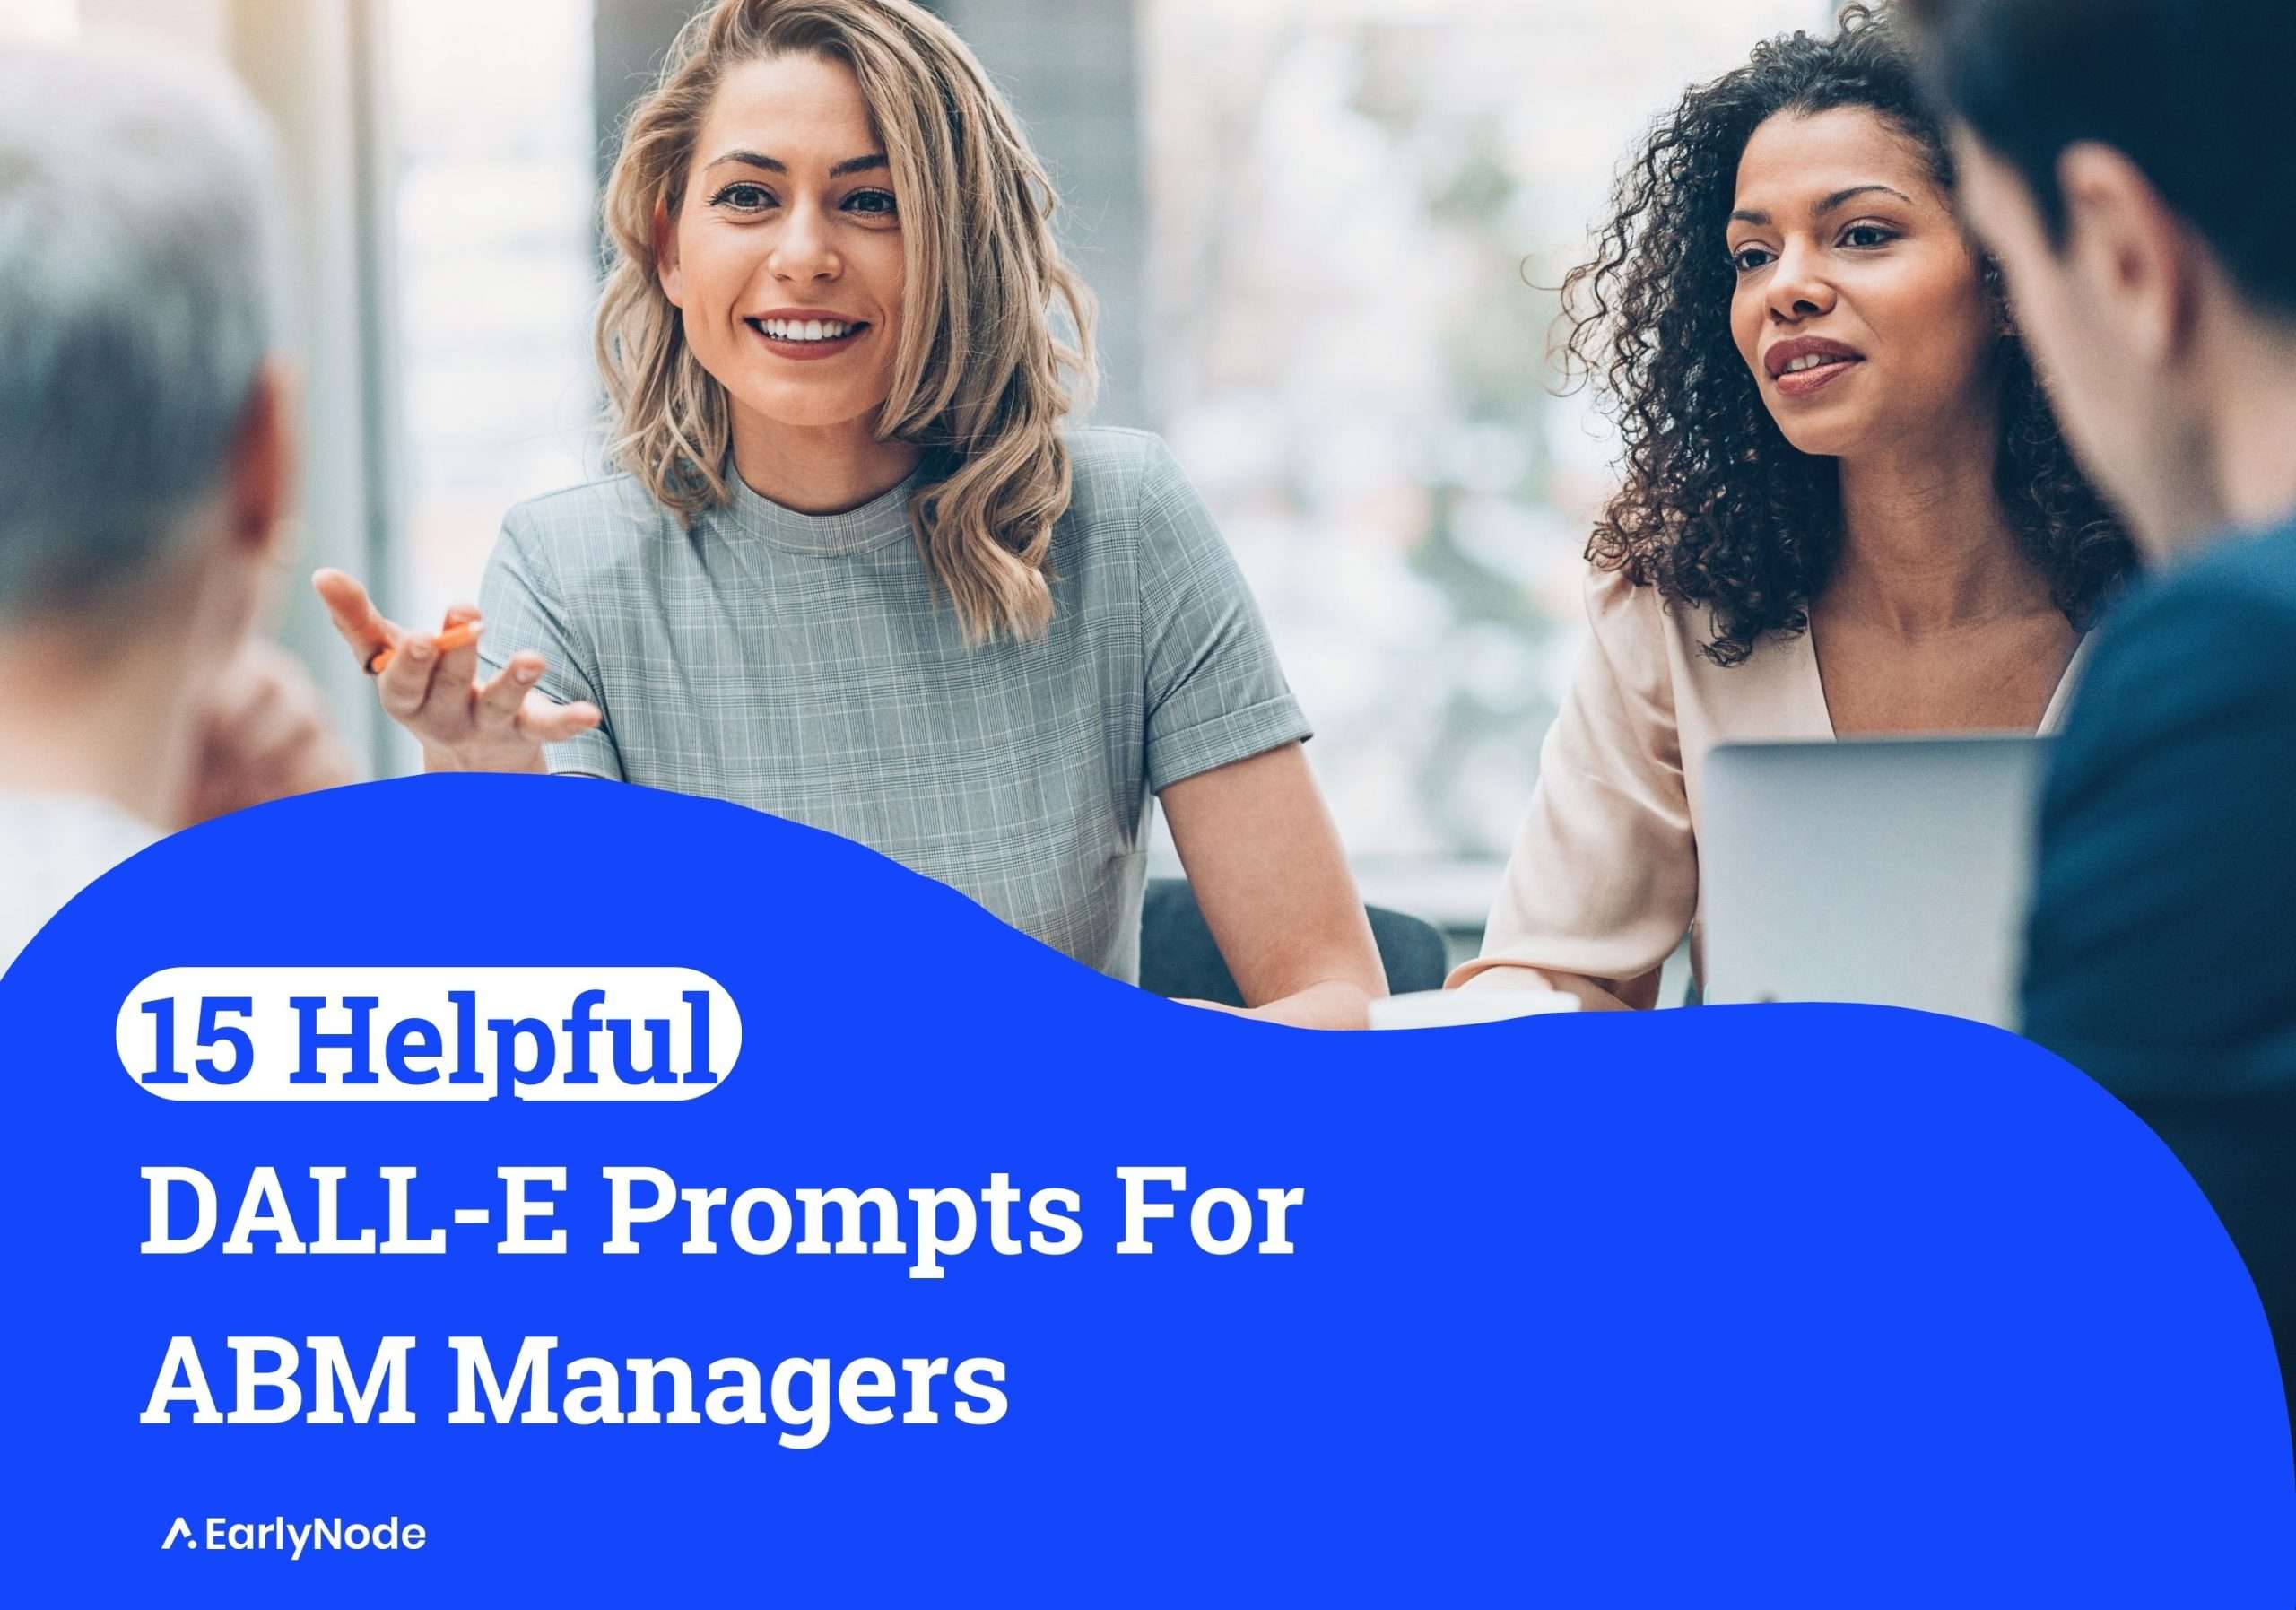 15+ Power-Packed DALL-E Prompts for Account-Based Marketing (ABM) Managers